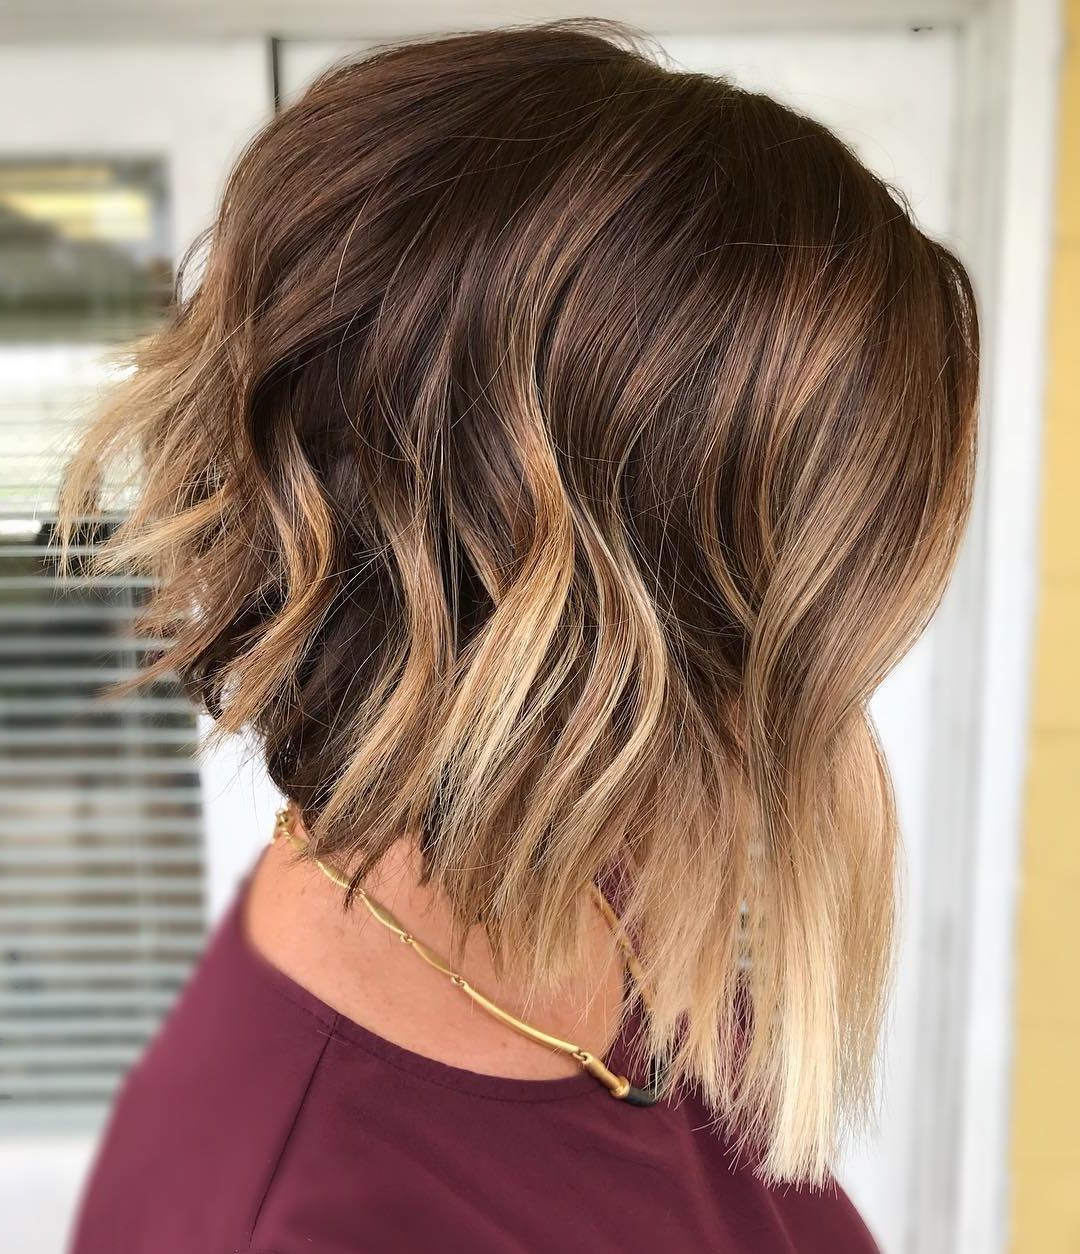 Find Your Best Bob Haircut For 2019 With Piece Y Golden Bob Hairstyles With Silver Highlights (View 9 of 20)